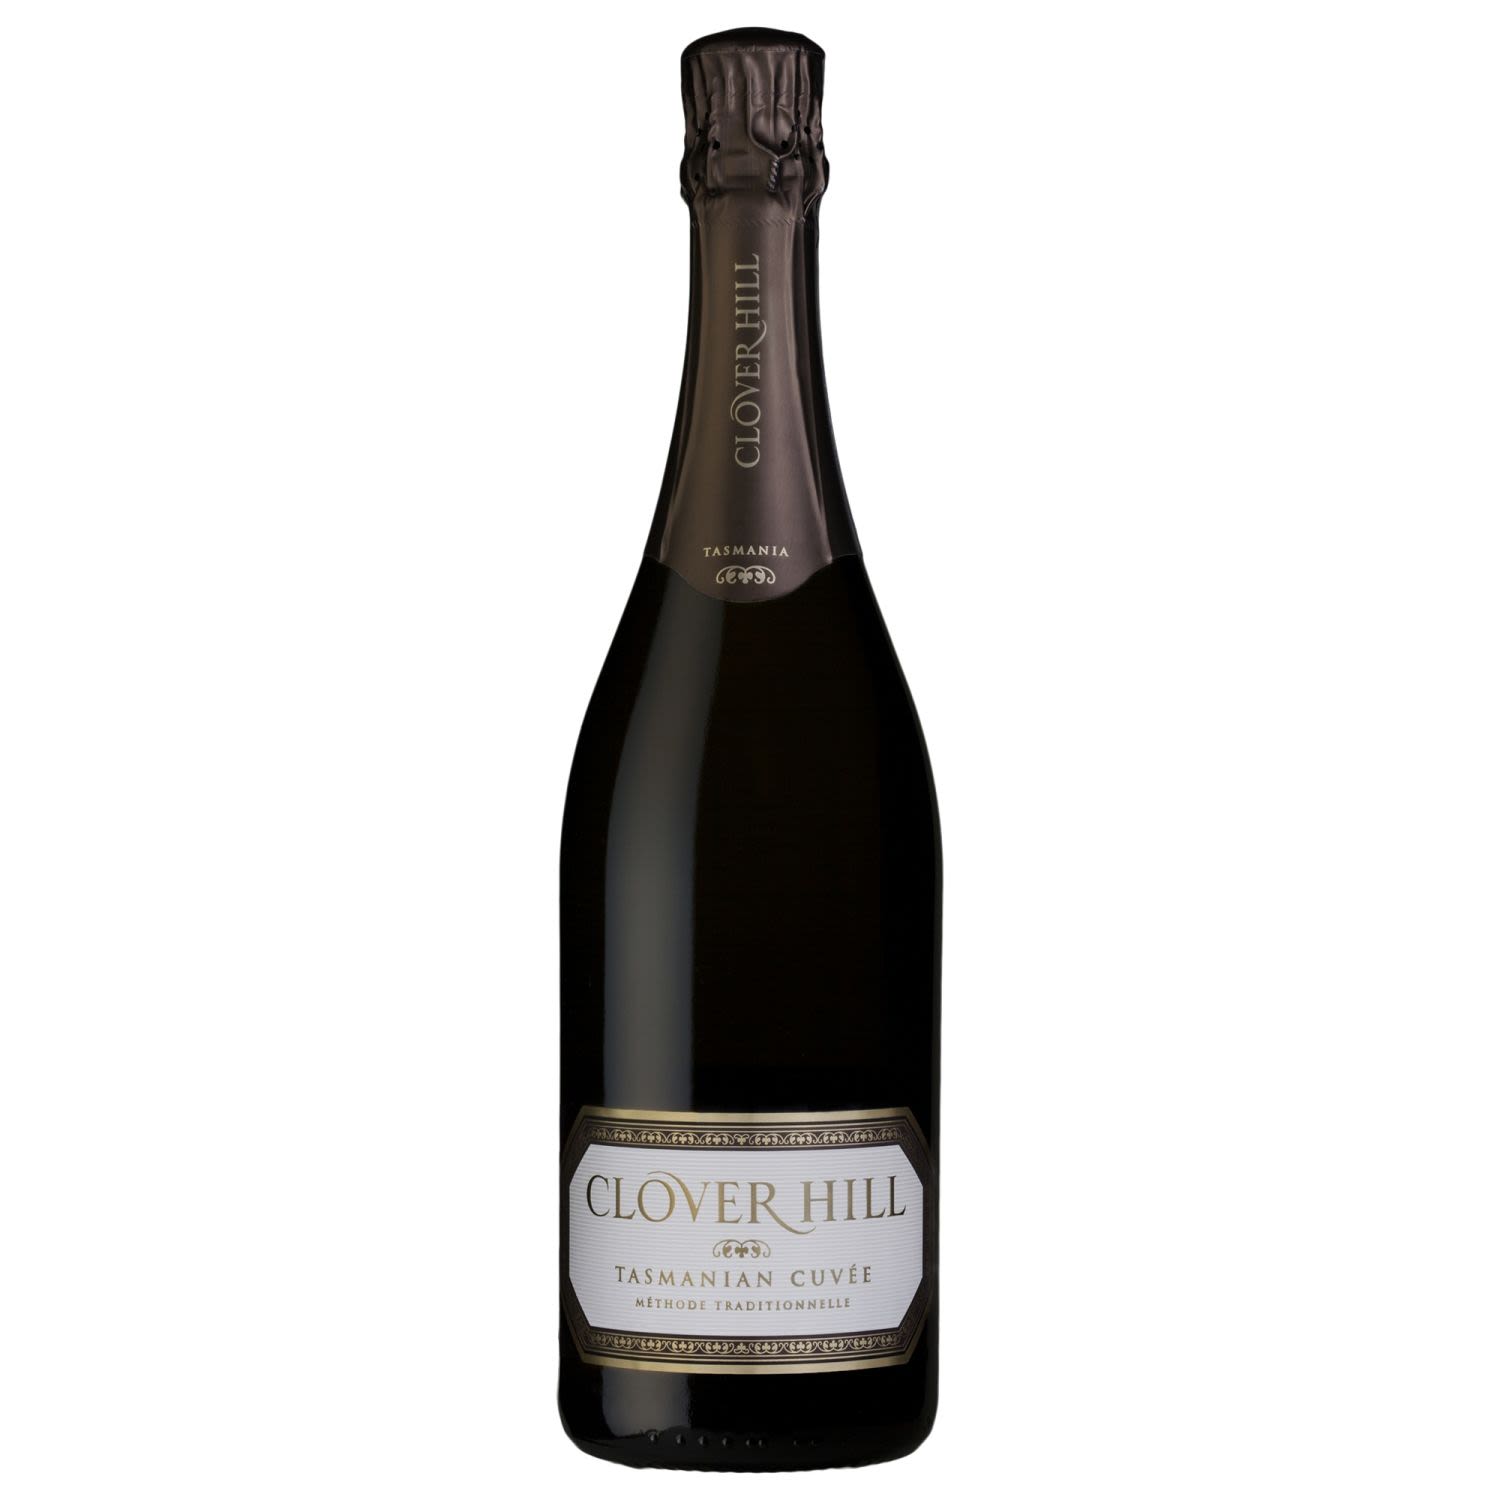 Clover Hill Tasmanian Cuvee NV is comprised of the finest parcels of Tasmanian fruit, from select vintages, skilfully blended to best represent the region and capture the vivacity and intensity that is the Clover Hill house style.<br /> <br />Alcohol Volume: 12.50%<br /><br />Pack Format: Bottle<br /><br />Standard Drinks: 7.4</br /><br />Pack Type: Bottle<br /><br />Country of Origin: Australia<br /><br />Region: Tasmania<br /><br />Vintage: Non Vintage<br />